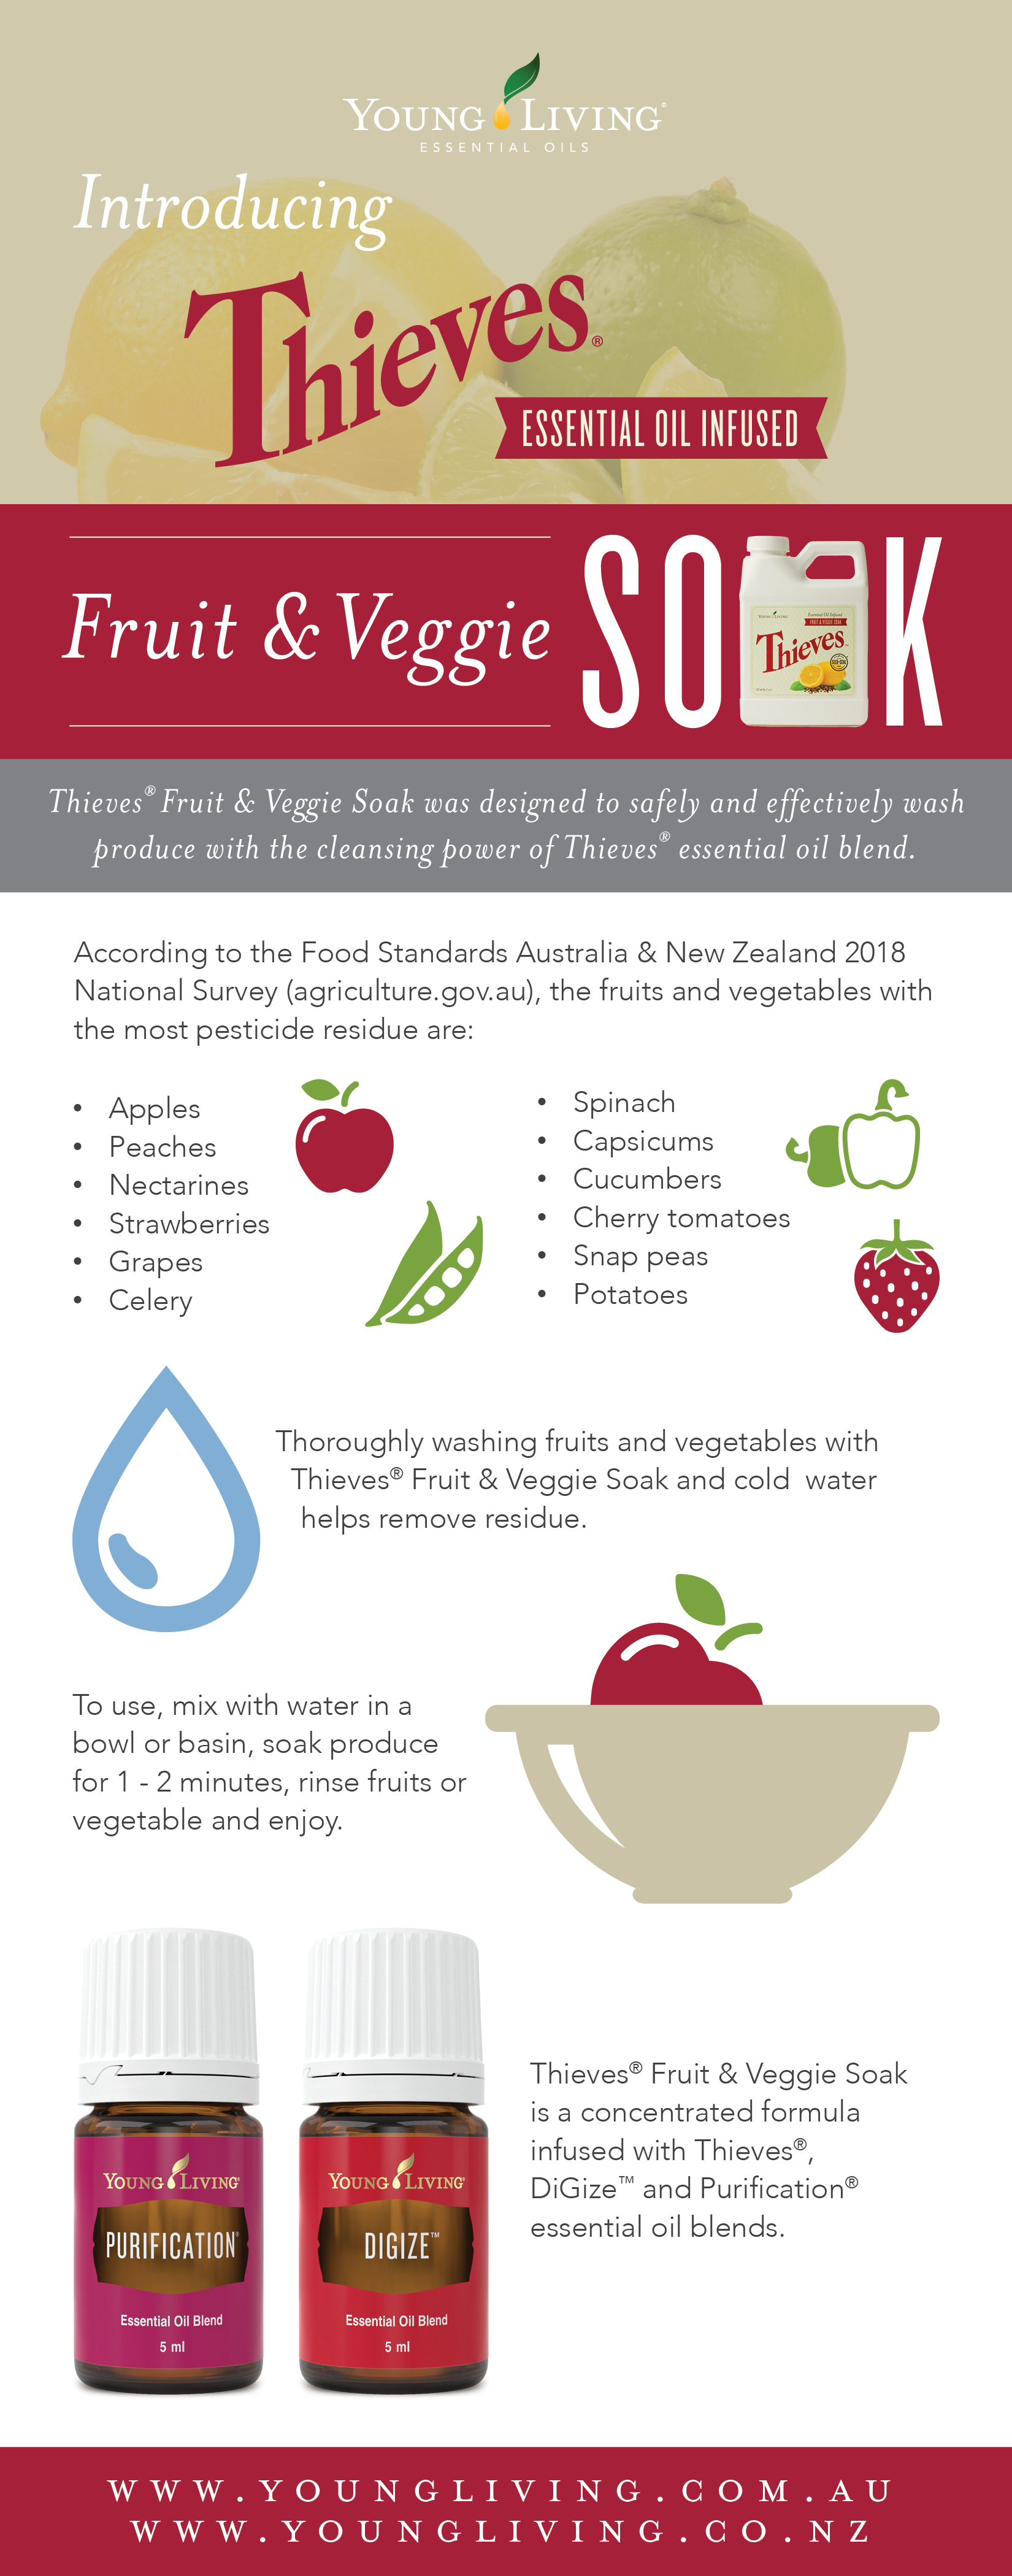 Thieves fruit and veggie soak young living infographic